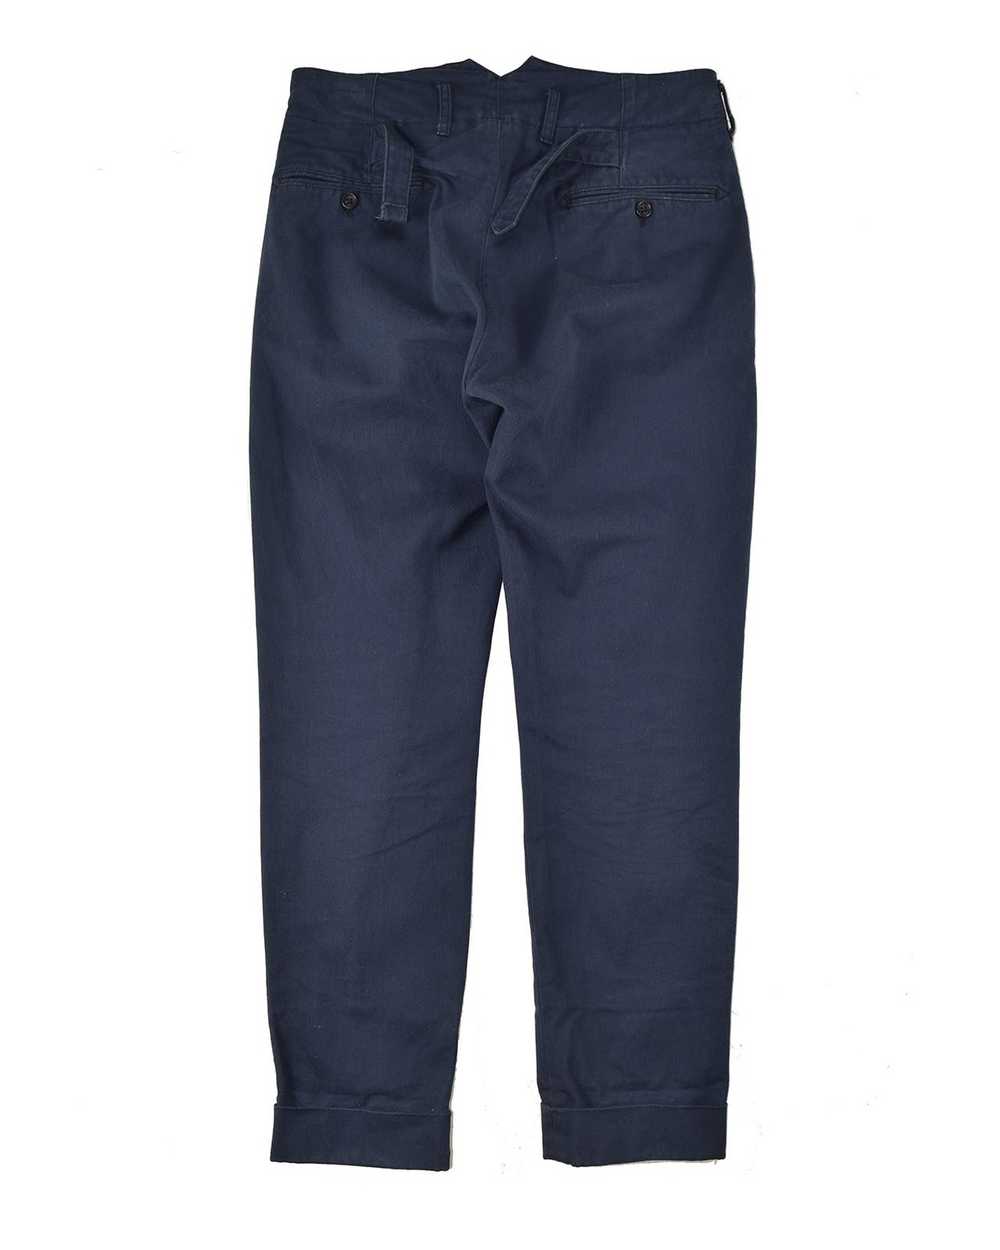 Engineered Garments Willy Post Pants - image 2